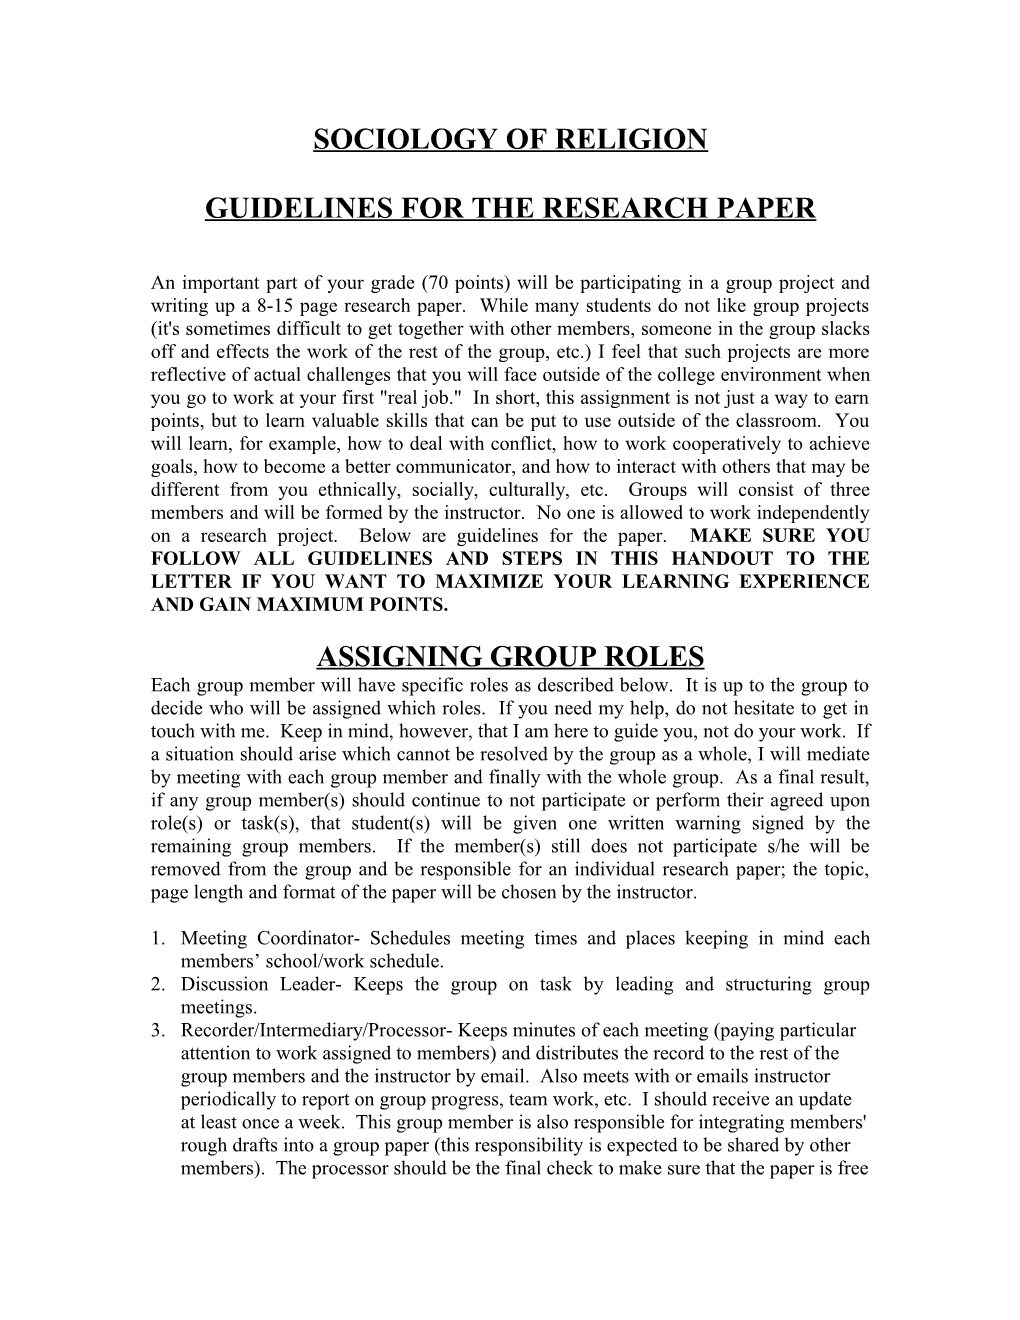 Guidelines for the Research Paper